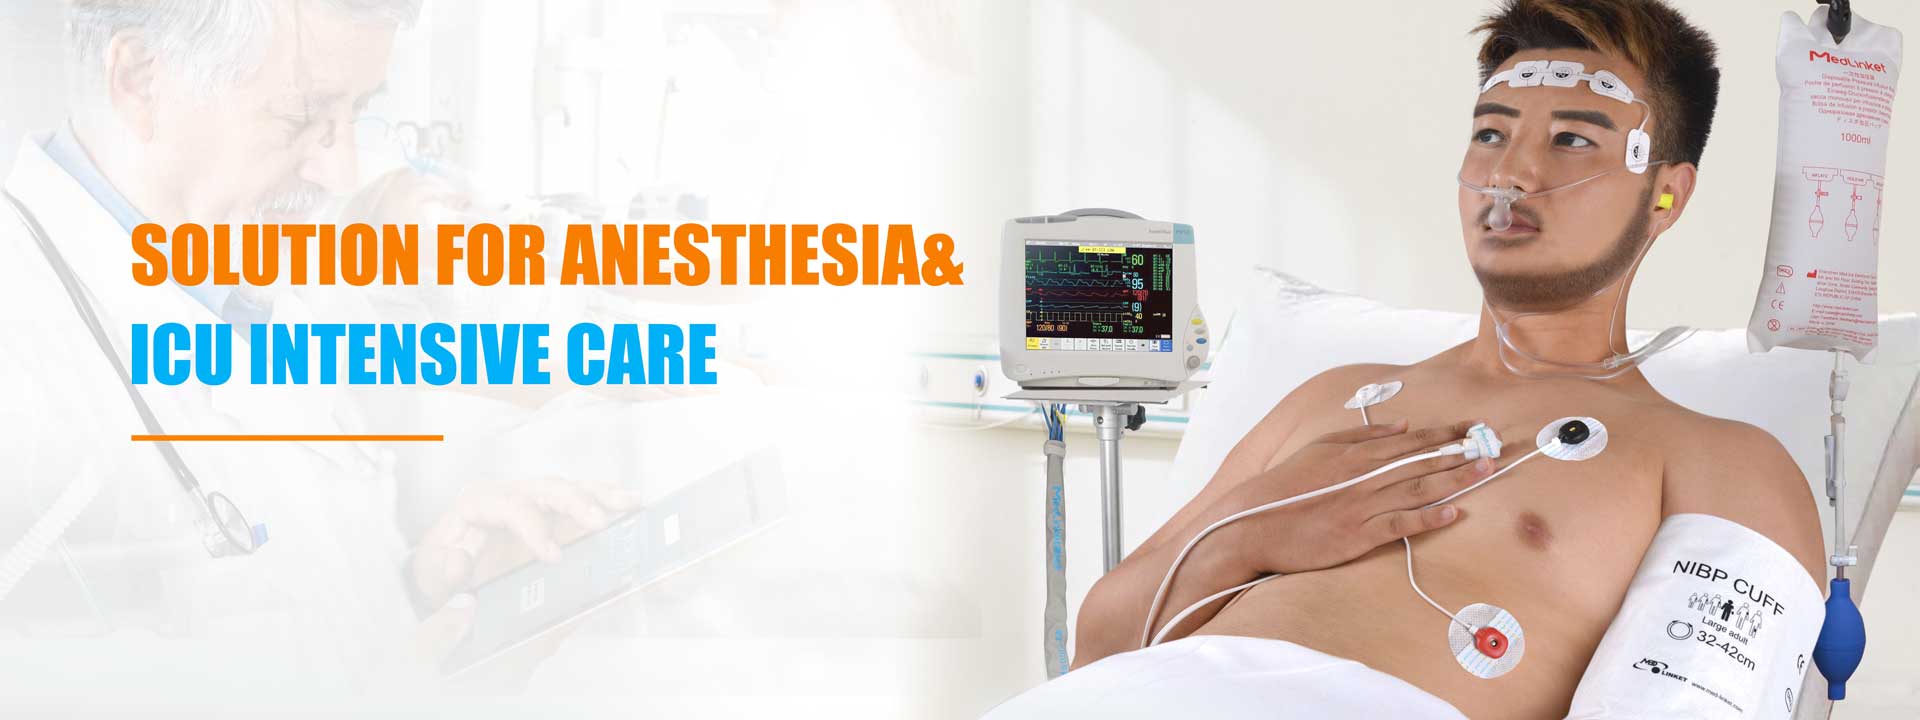 Solution for anesthesia & ICU intensive care